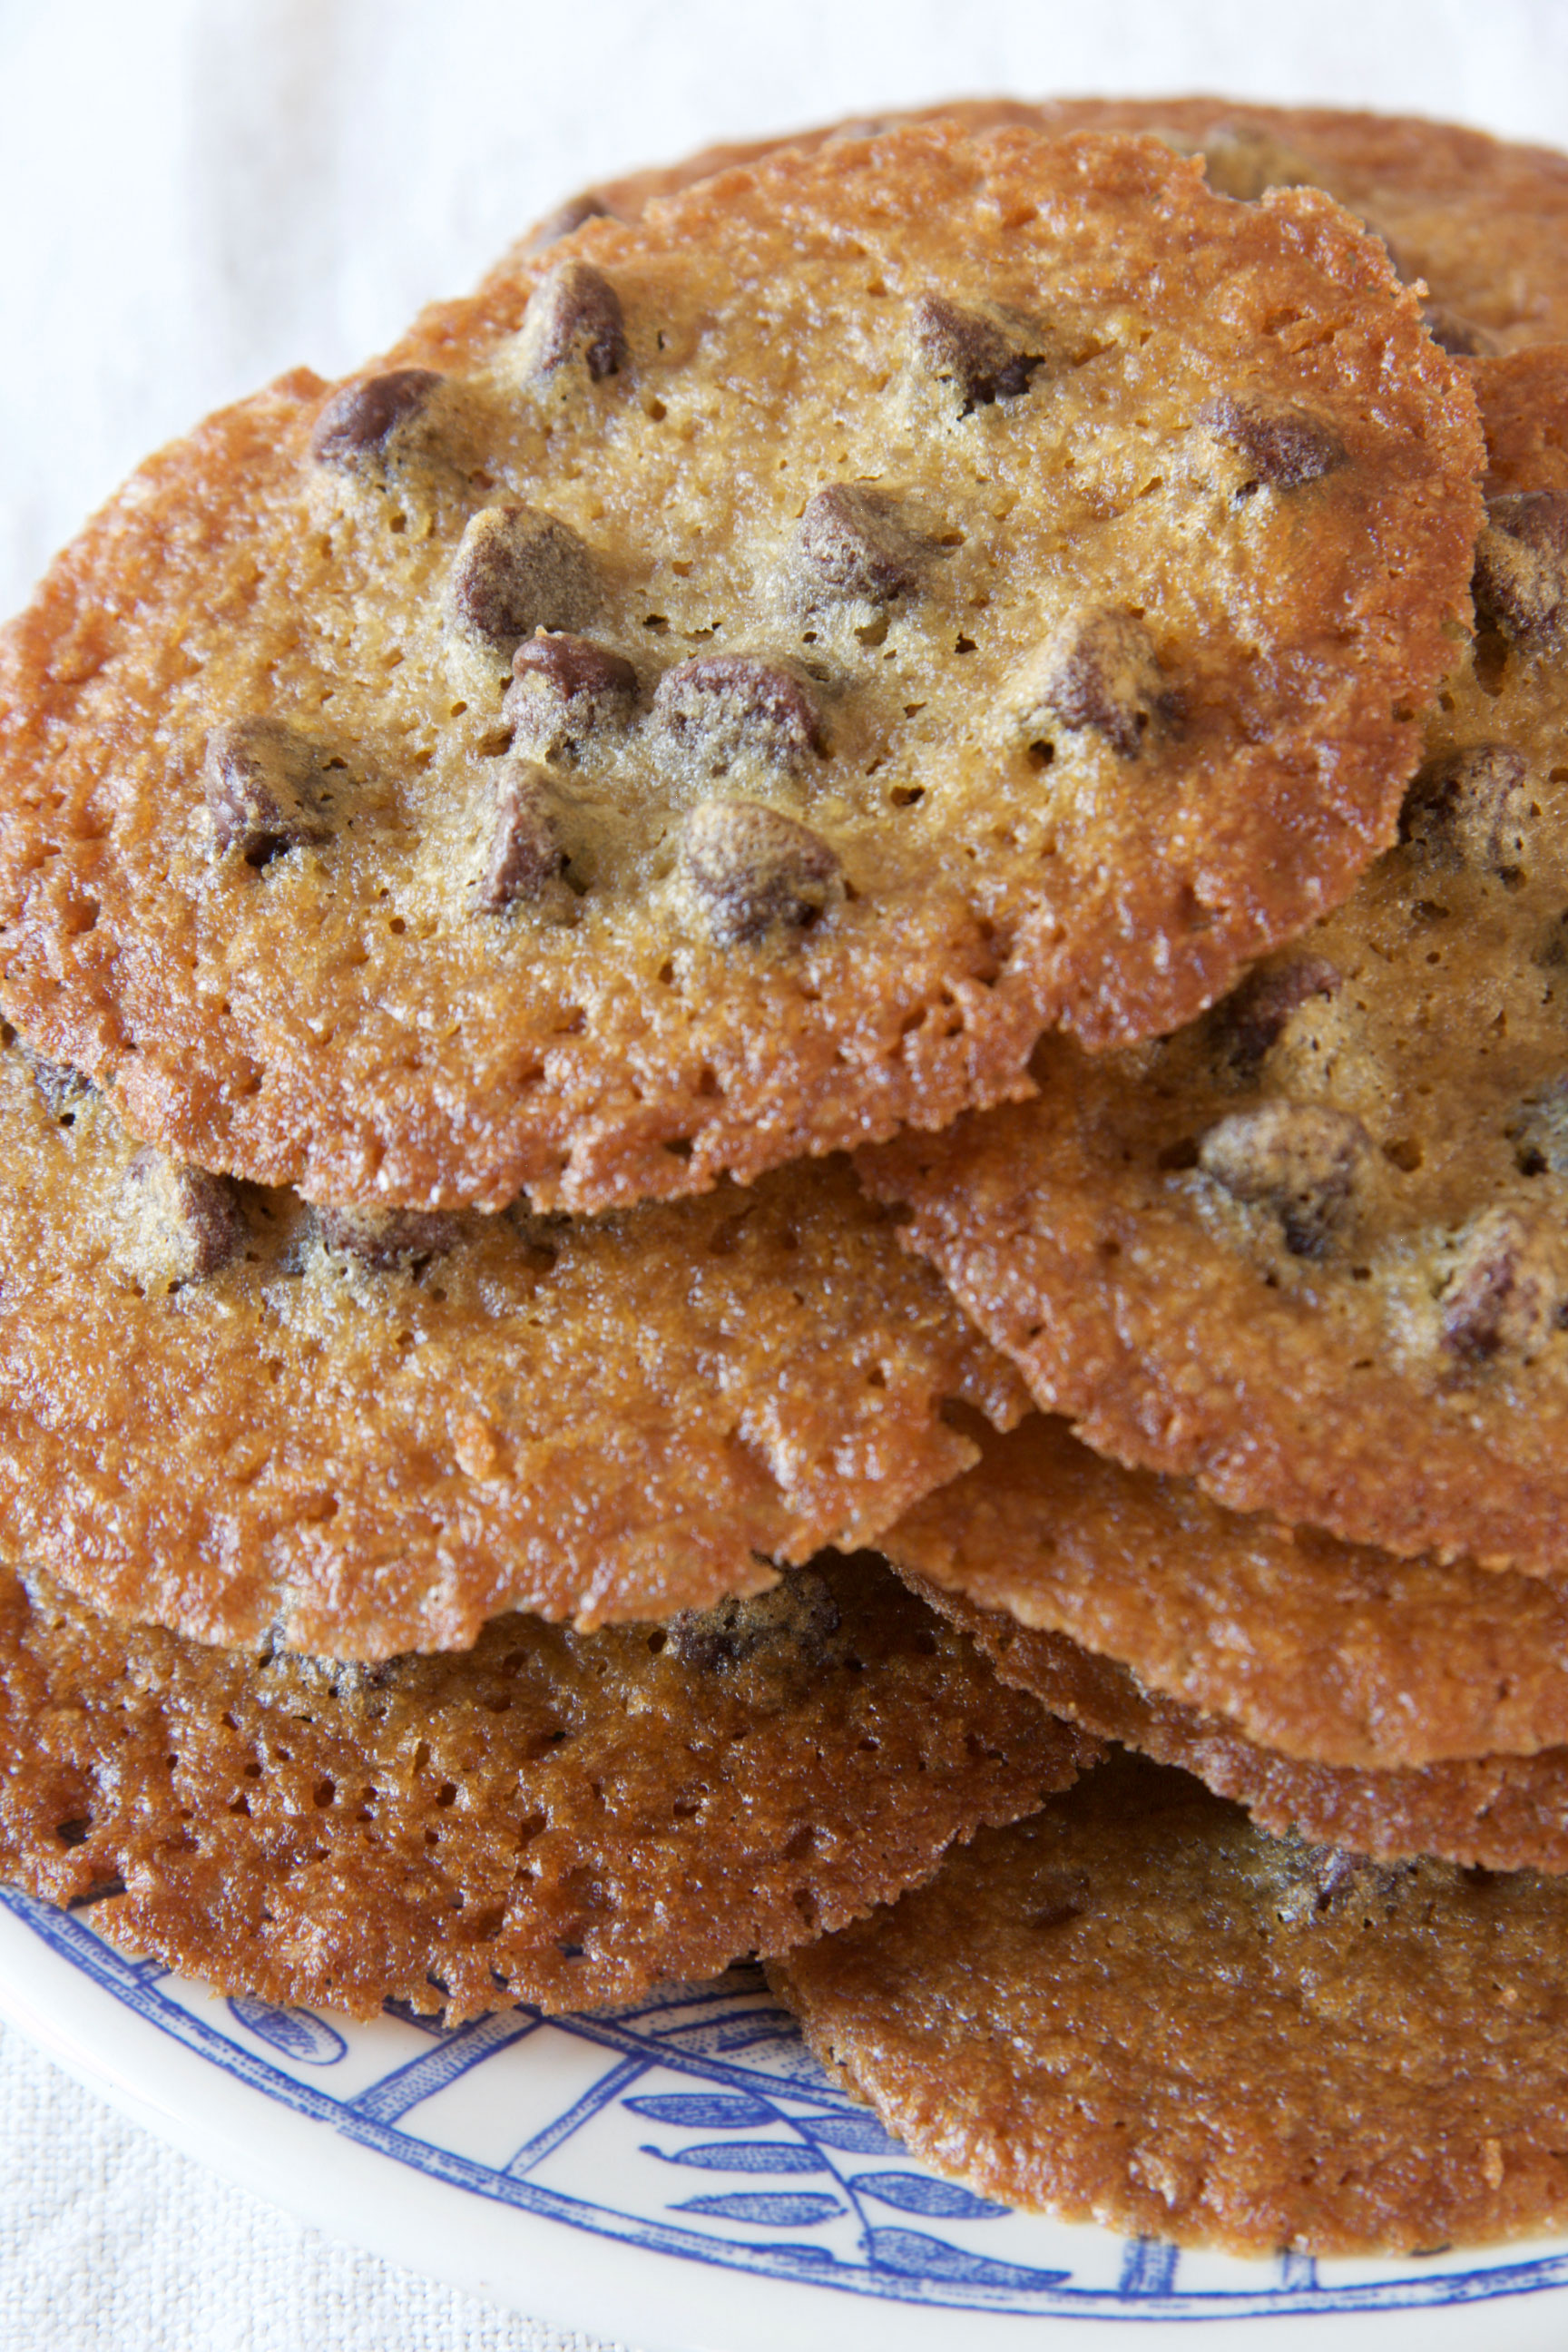 Ridgely's thin crisp chocolate chip cookies melt in your mouth! This recipe is a family favorite and there are never any left from a fresh batch.